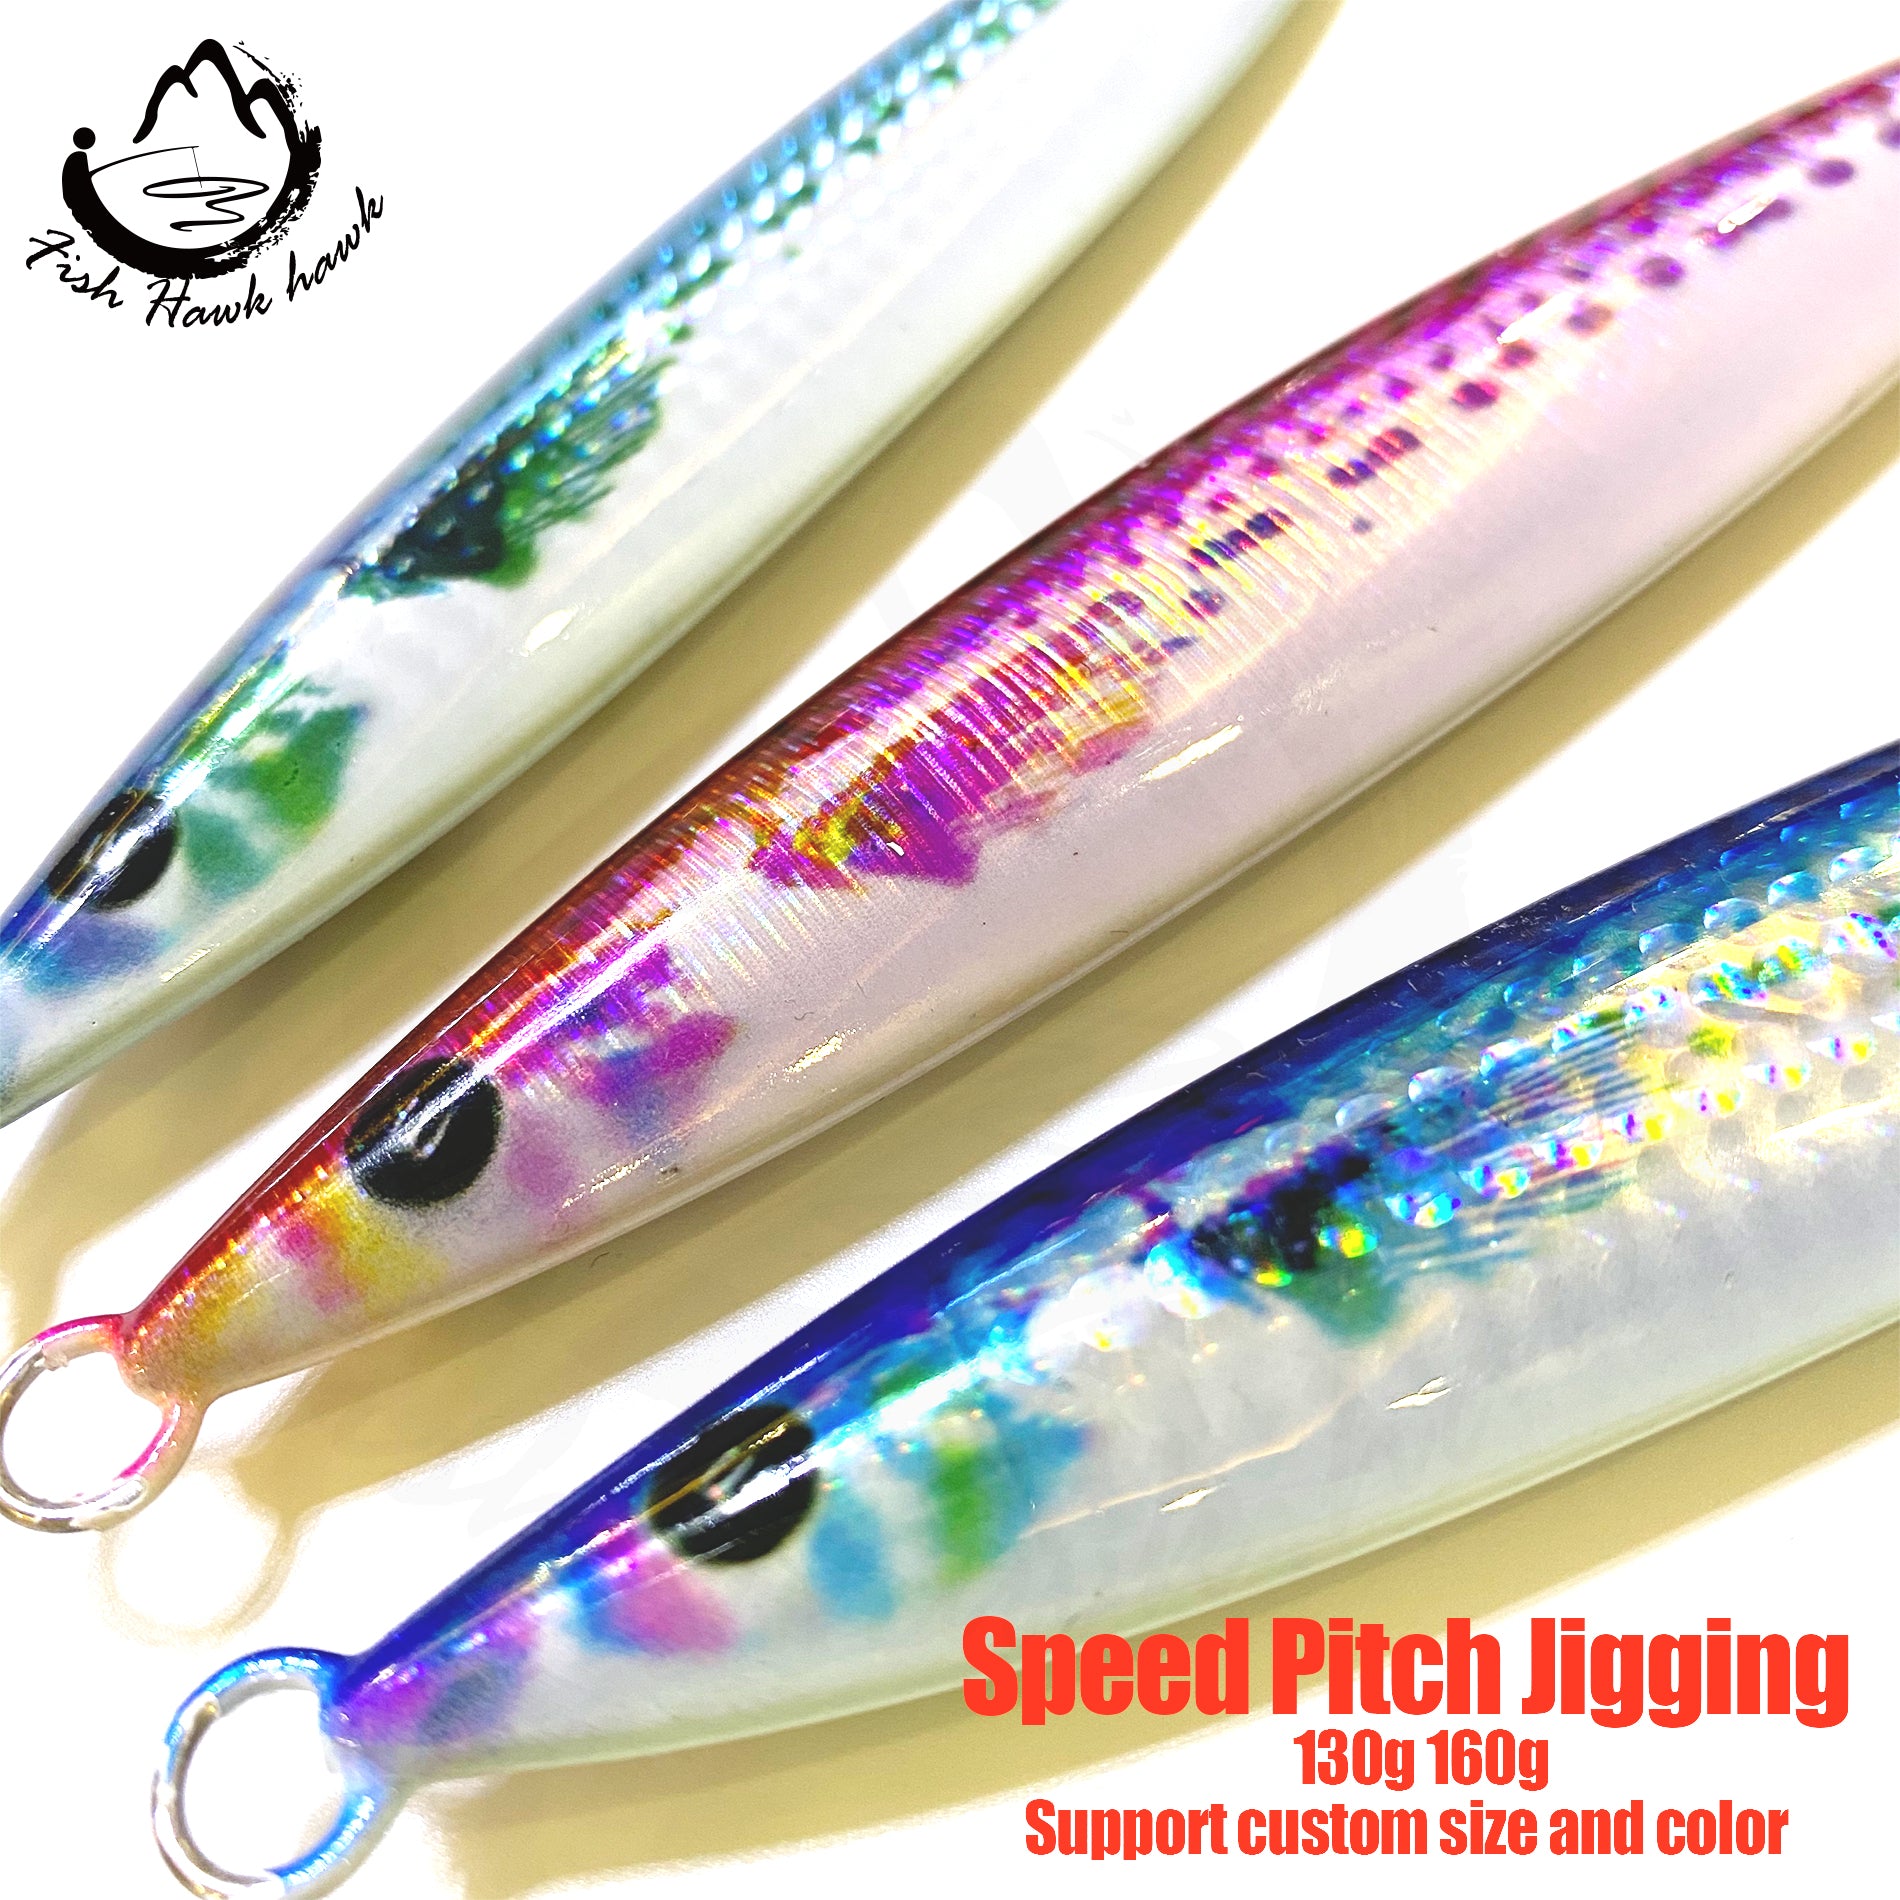 134 Slow/Speed Pitch Jigs Bait 130g 160g – Jigs Fishing Tackle Store